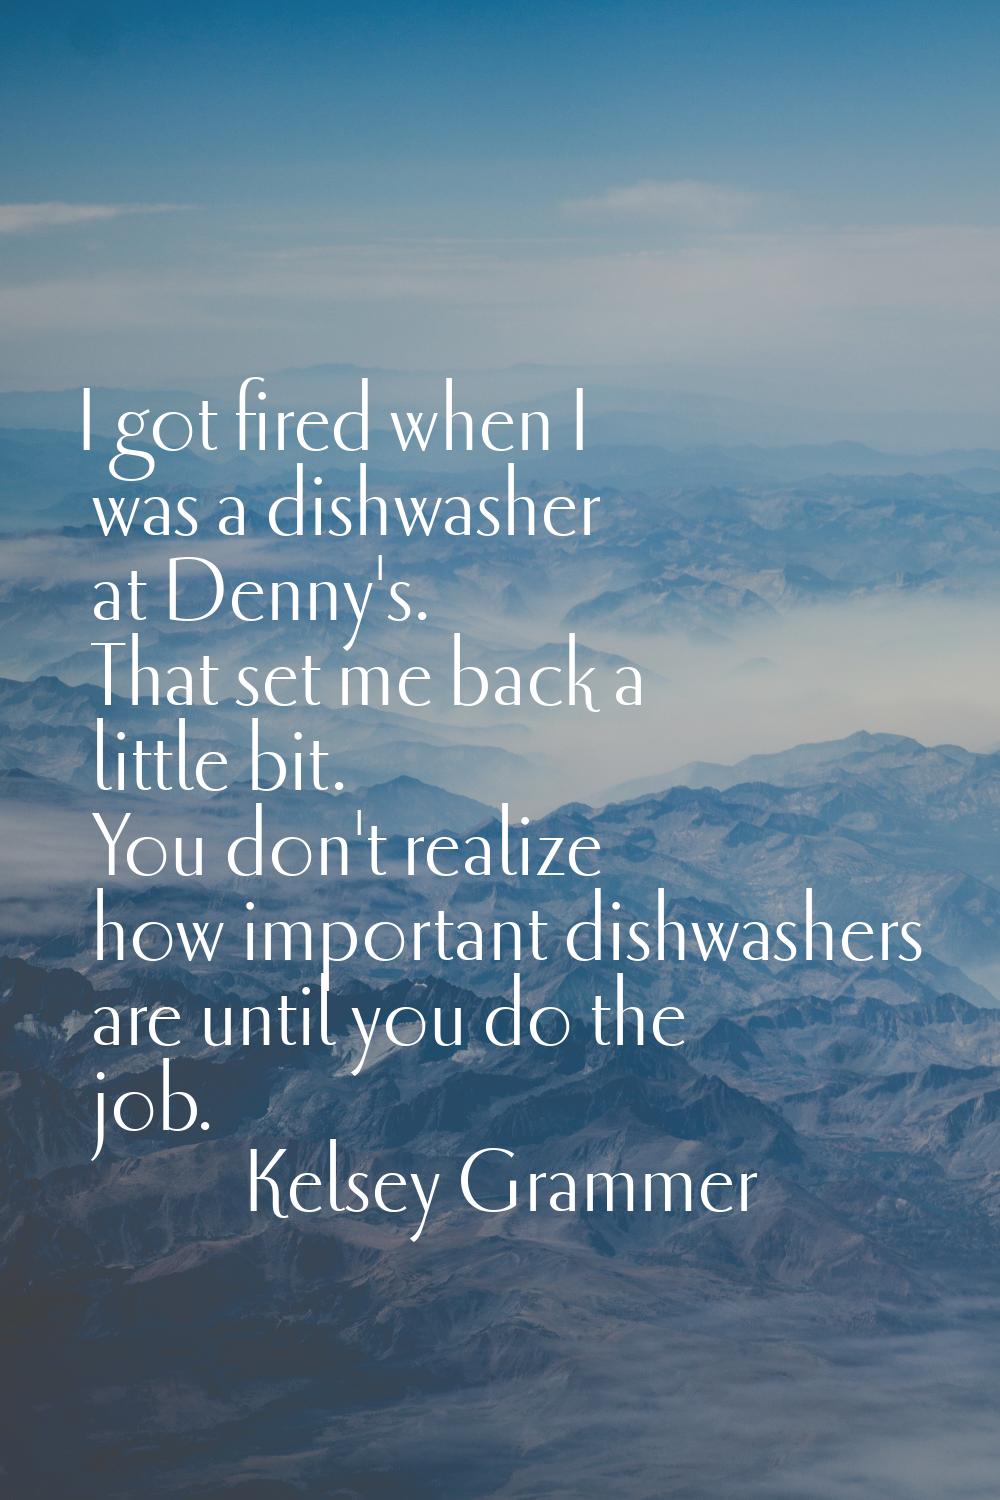 I got fired when I was a dishwasher at Denny's. That set me back a little bit. You don't realize ho